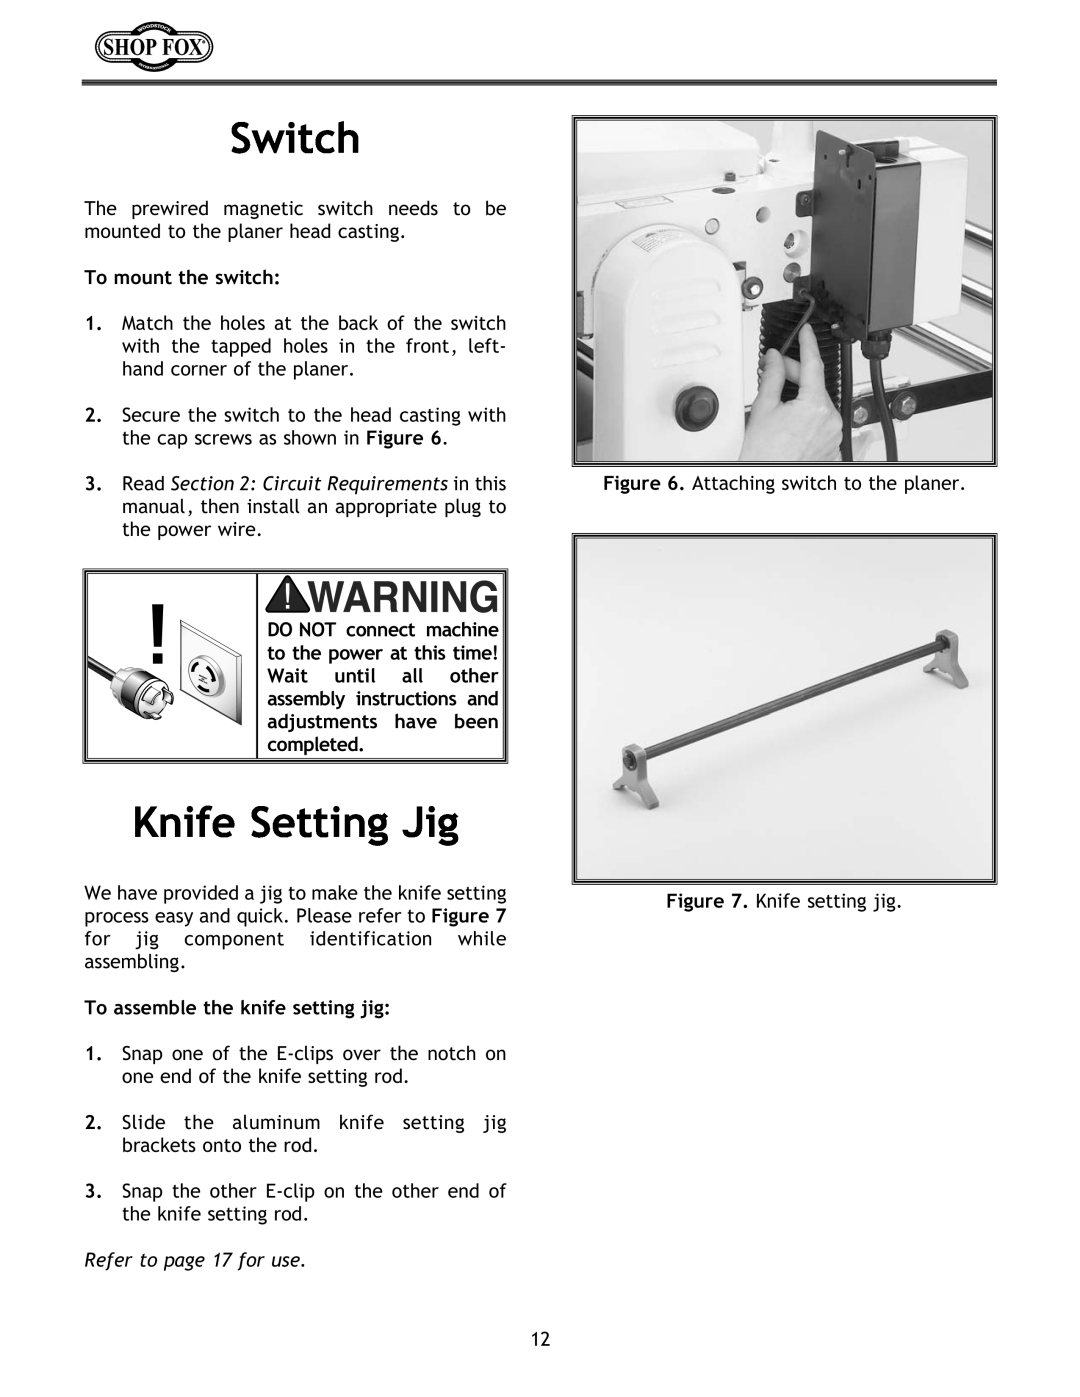 Woodstock W1683 instruction manual Switch, Knife Setting Jig, To mount the switch, To assemble the knife setting jig 